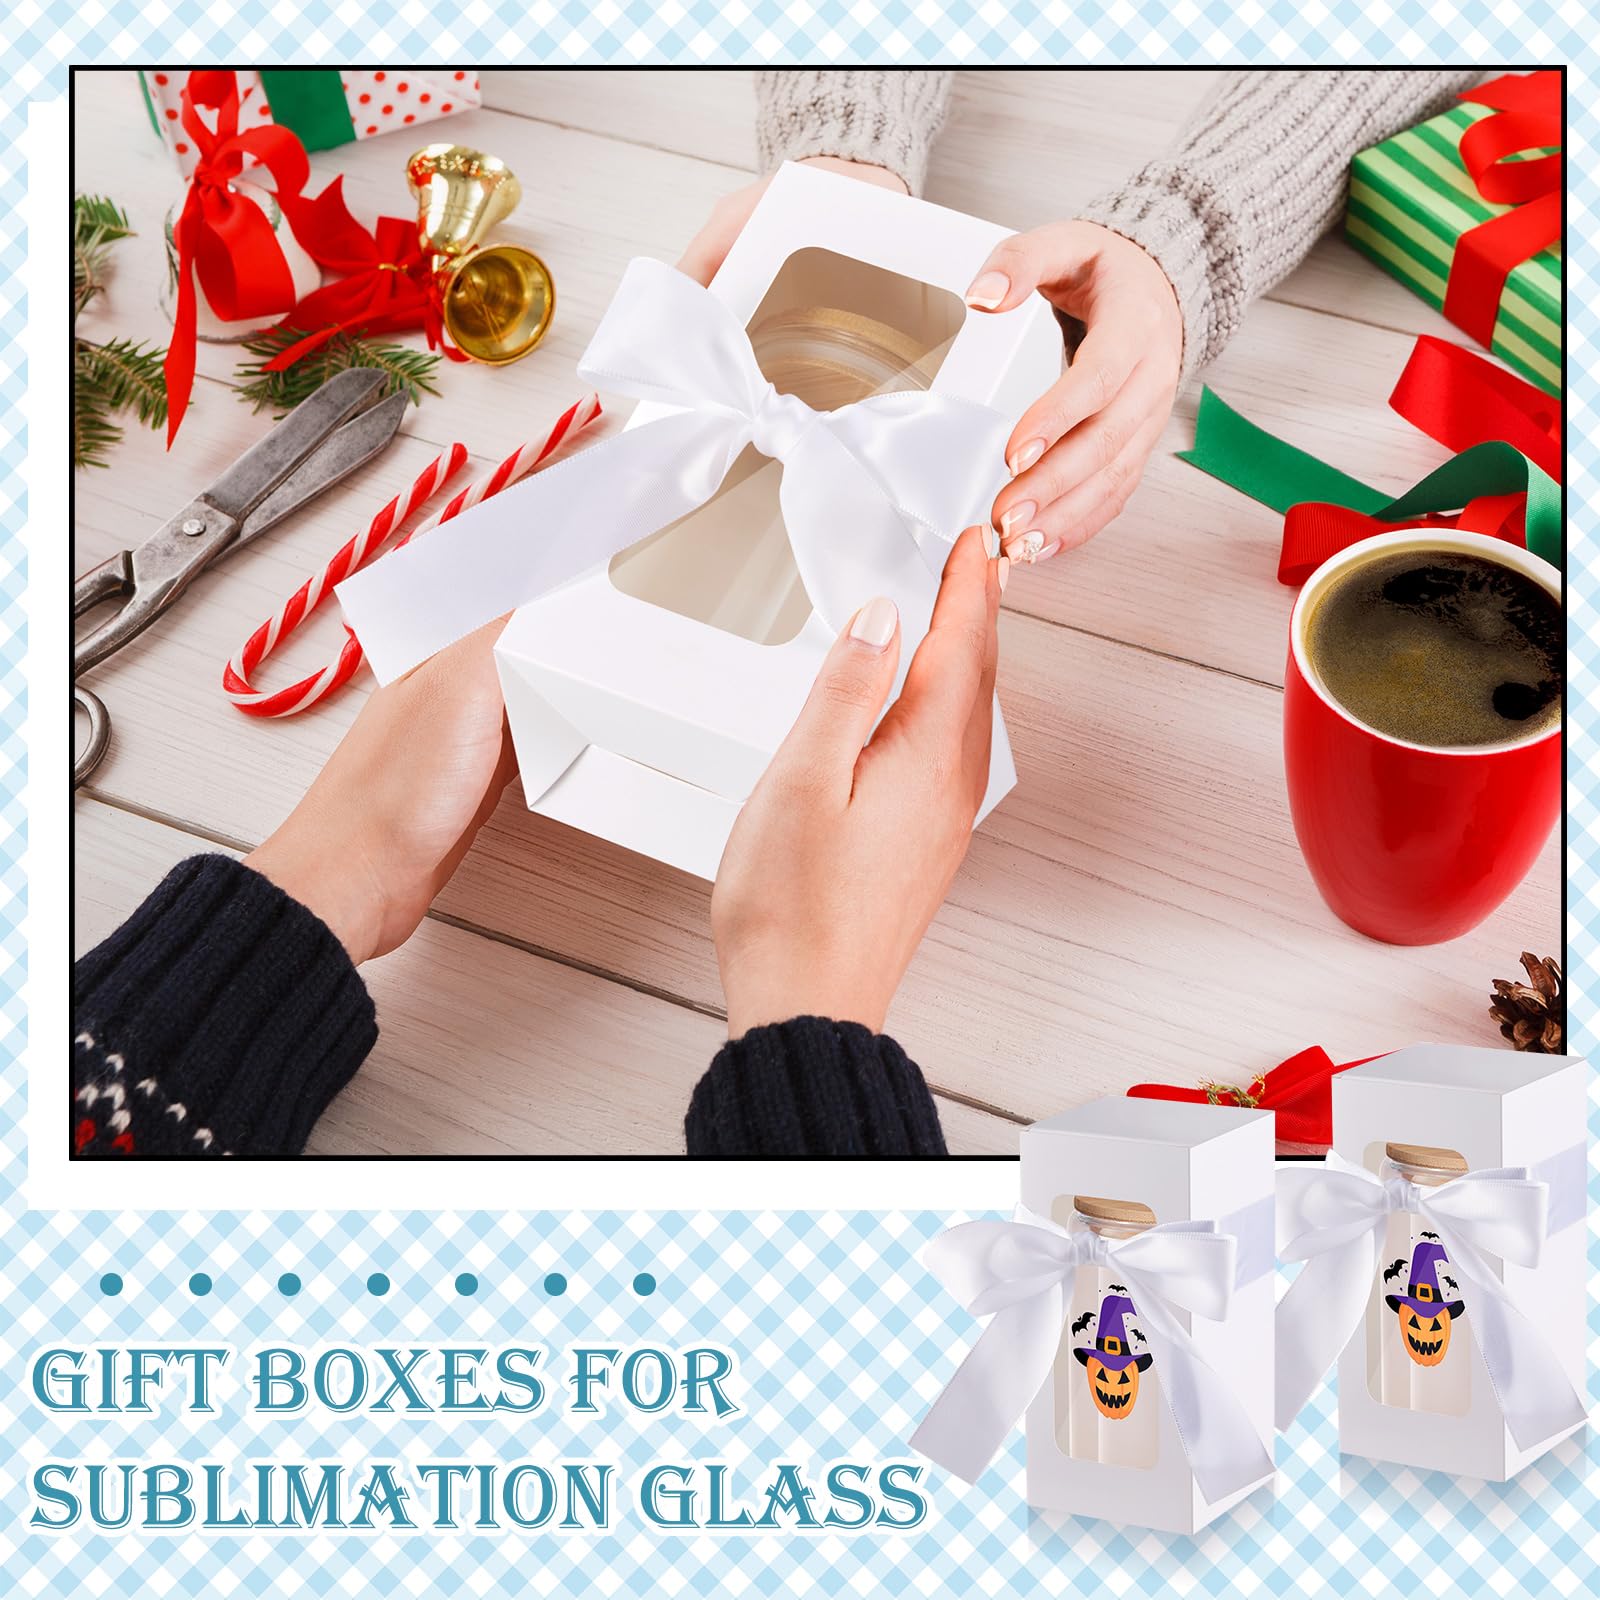 Fulmoon 36 Sets Sublimation Glass Gift Boxes 3.08x3.08x6.38 Inches Exhibition Box Tumbler Boxes Transparent Gift Box with Ribbon for Thanksgiving Christmas 12, 16, 18oz Sublimation Glass (White)